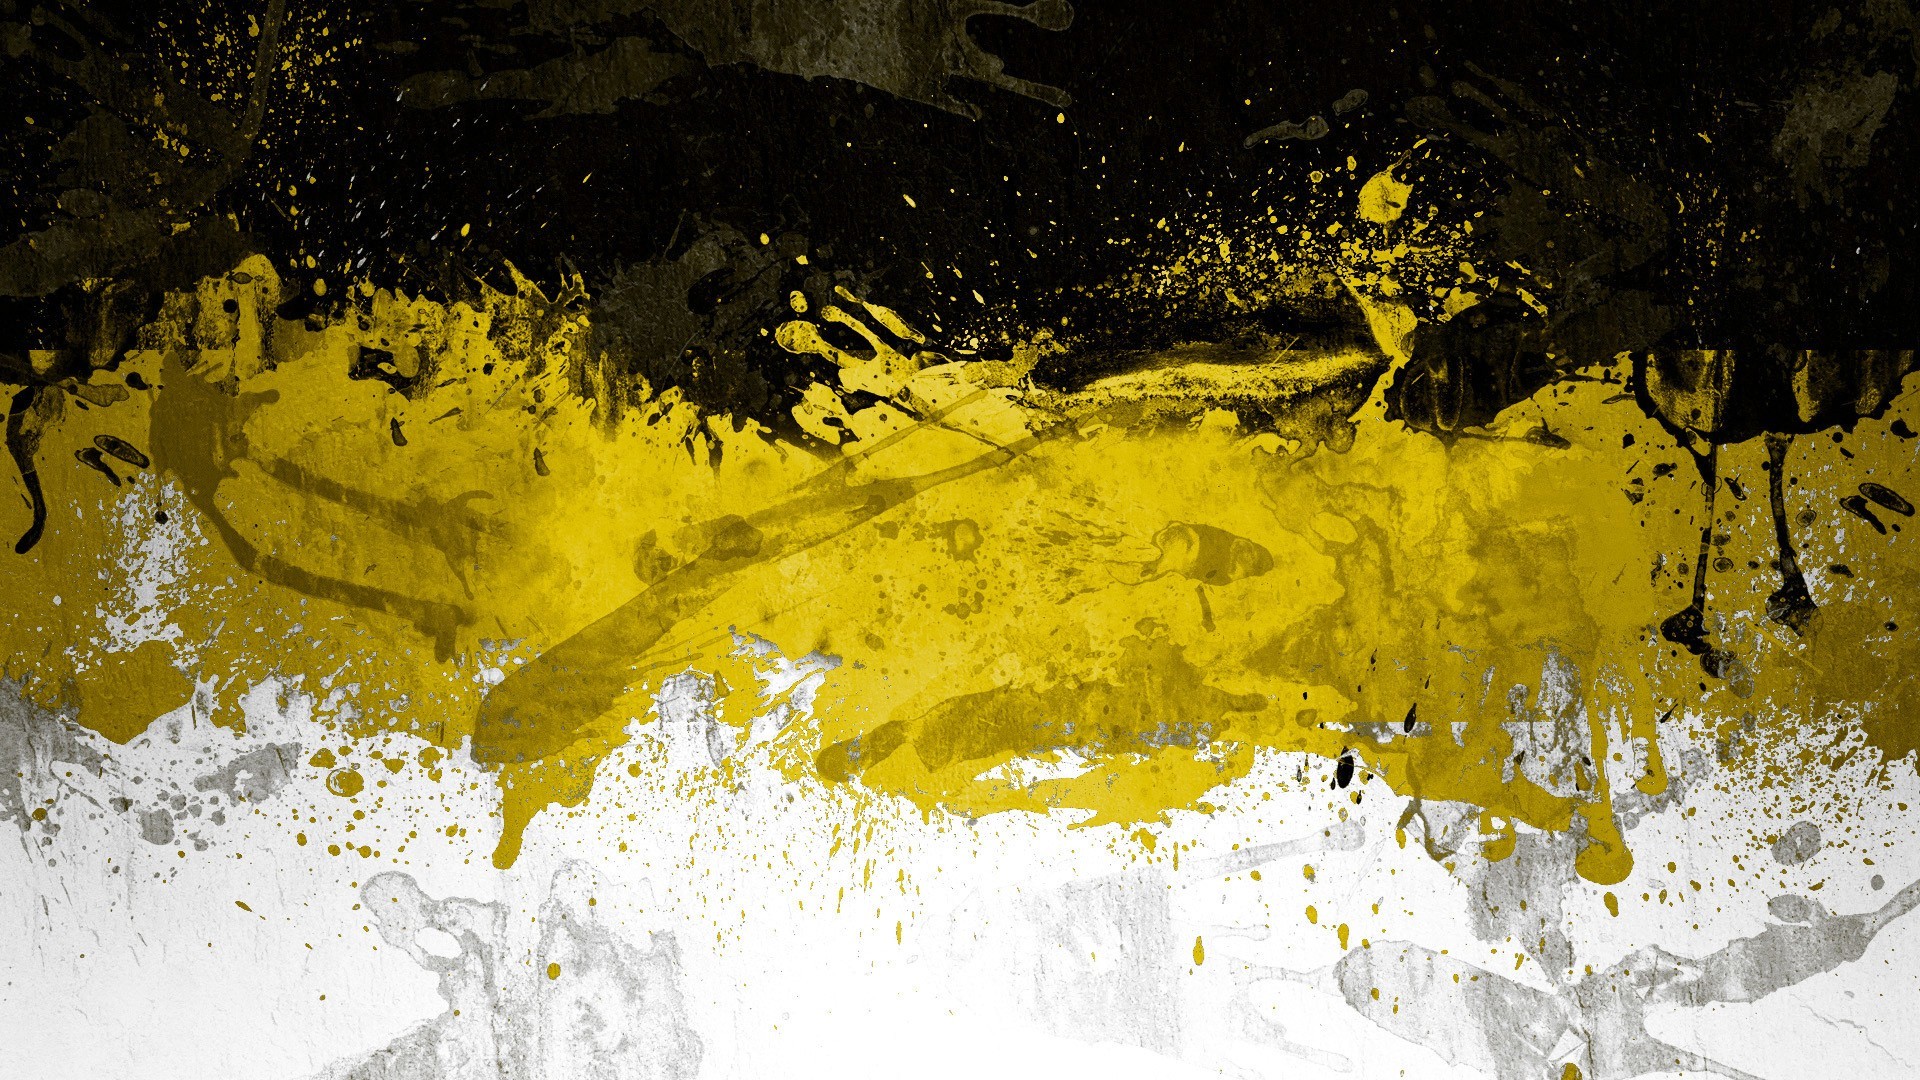 1920x1080 Black And Yellow Abstract Desktop Backgrounds 1509 - HD Wallpaper Site